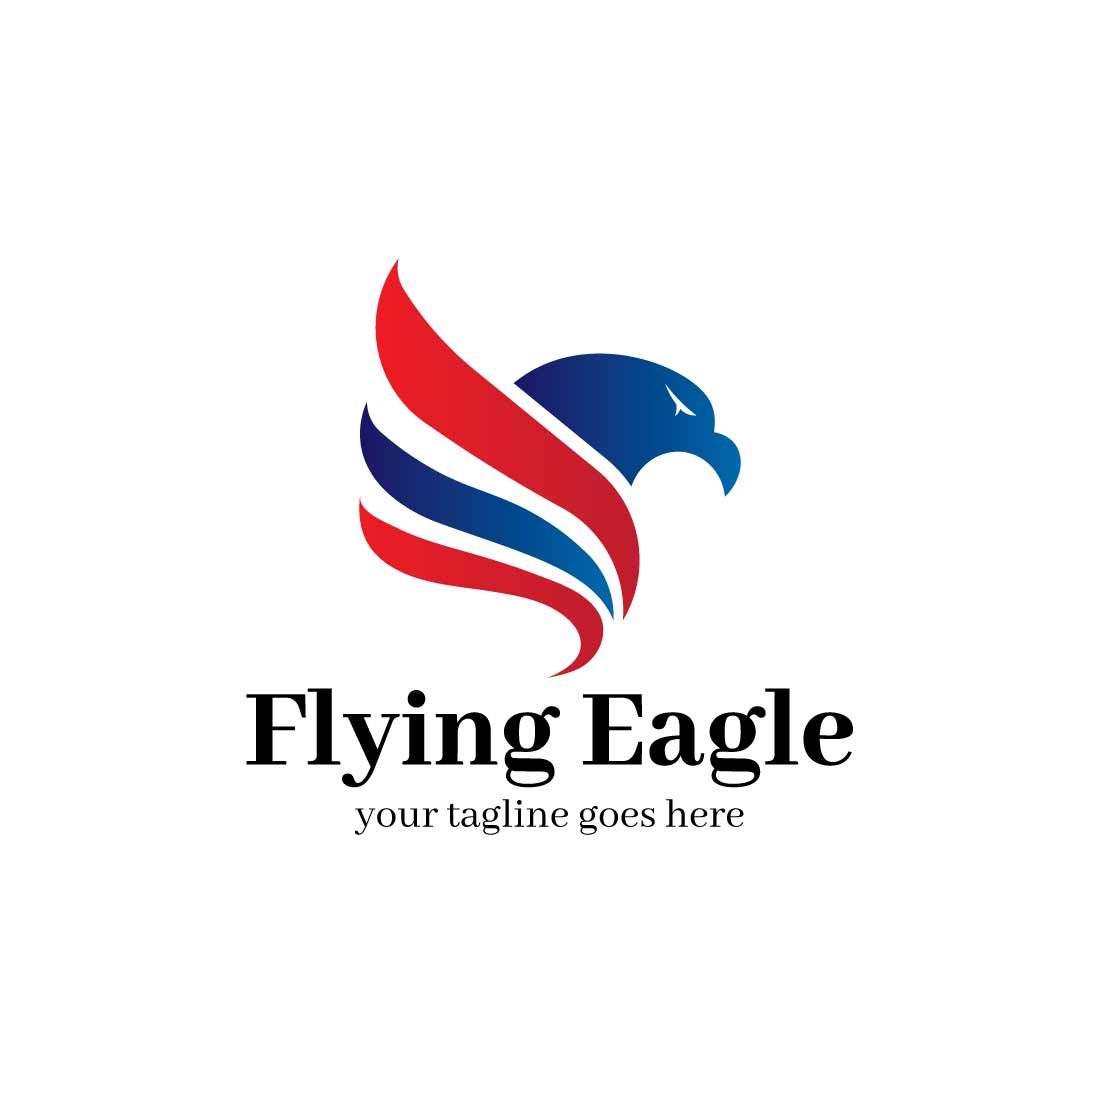 flying eagle logo vector illustration in white background isolated preview image.